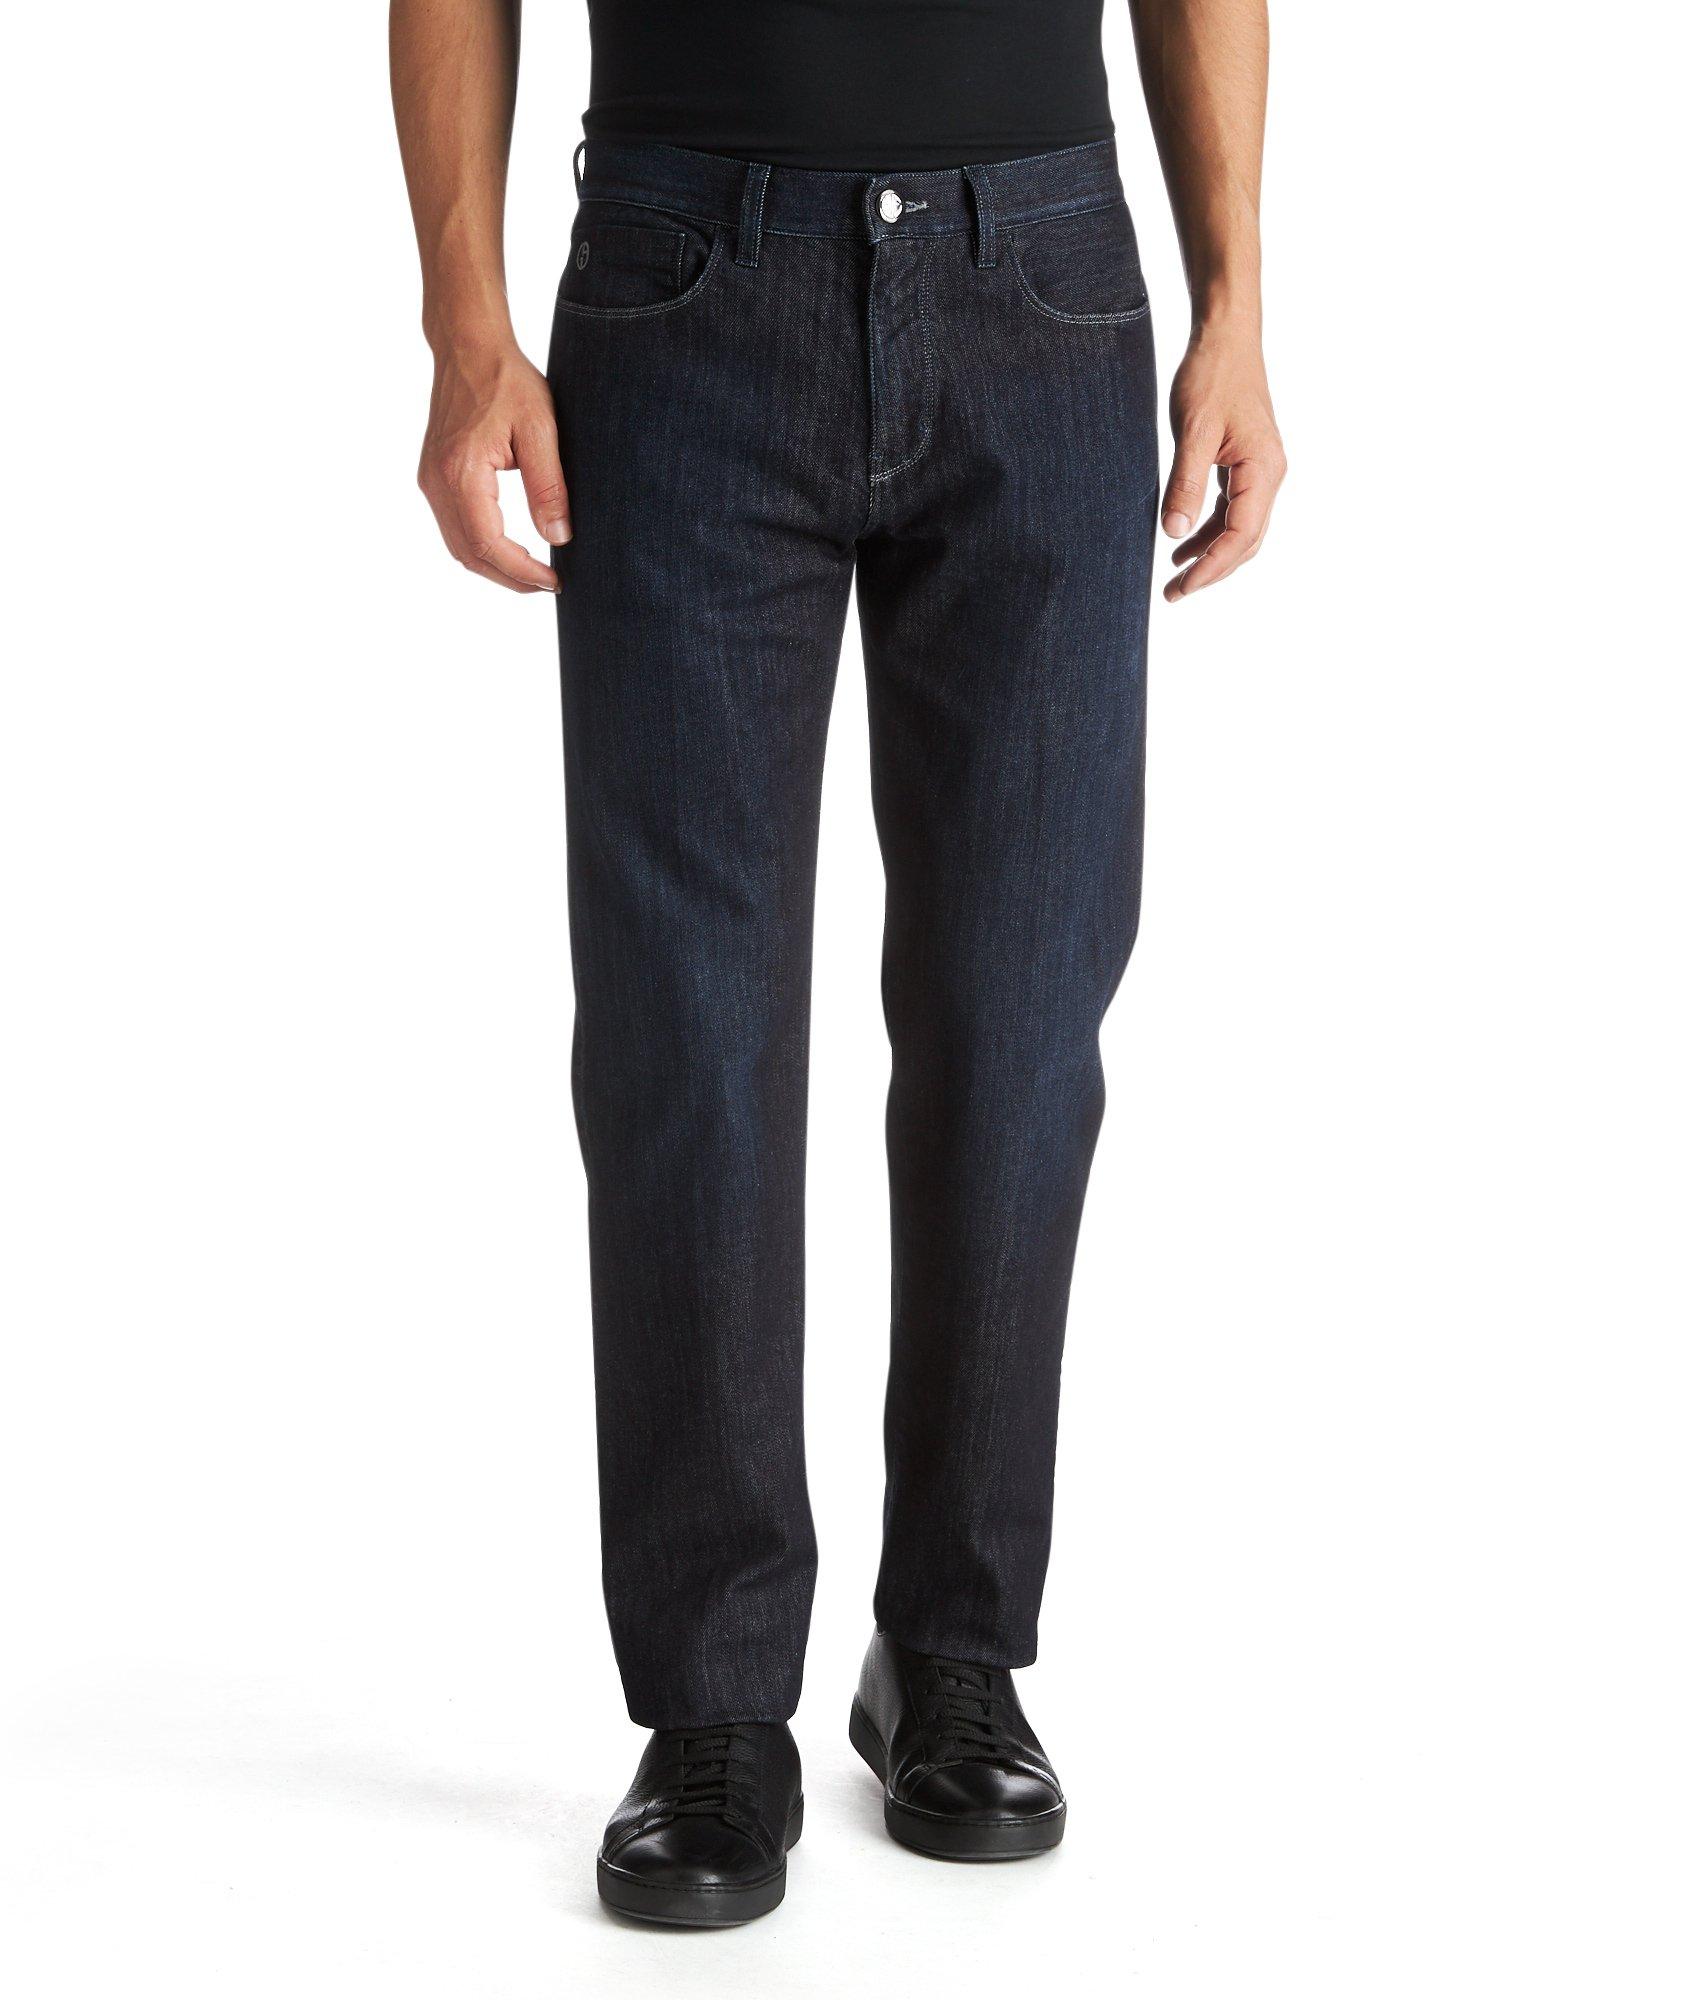 Straight Fit Jeans image 0